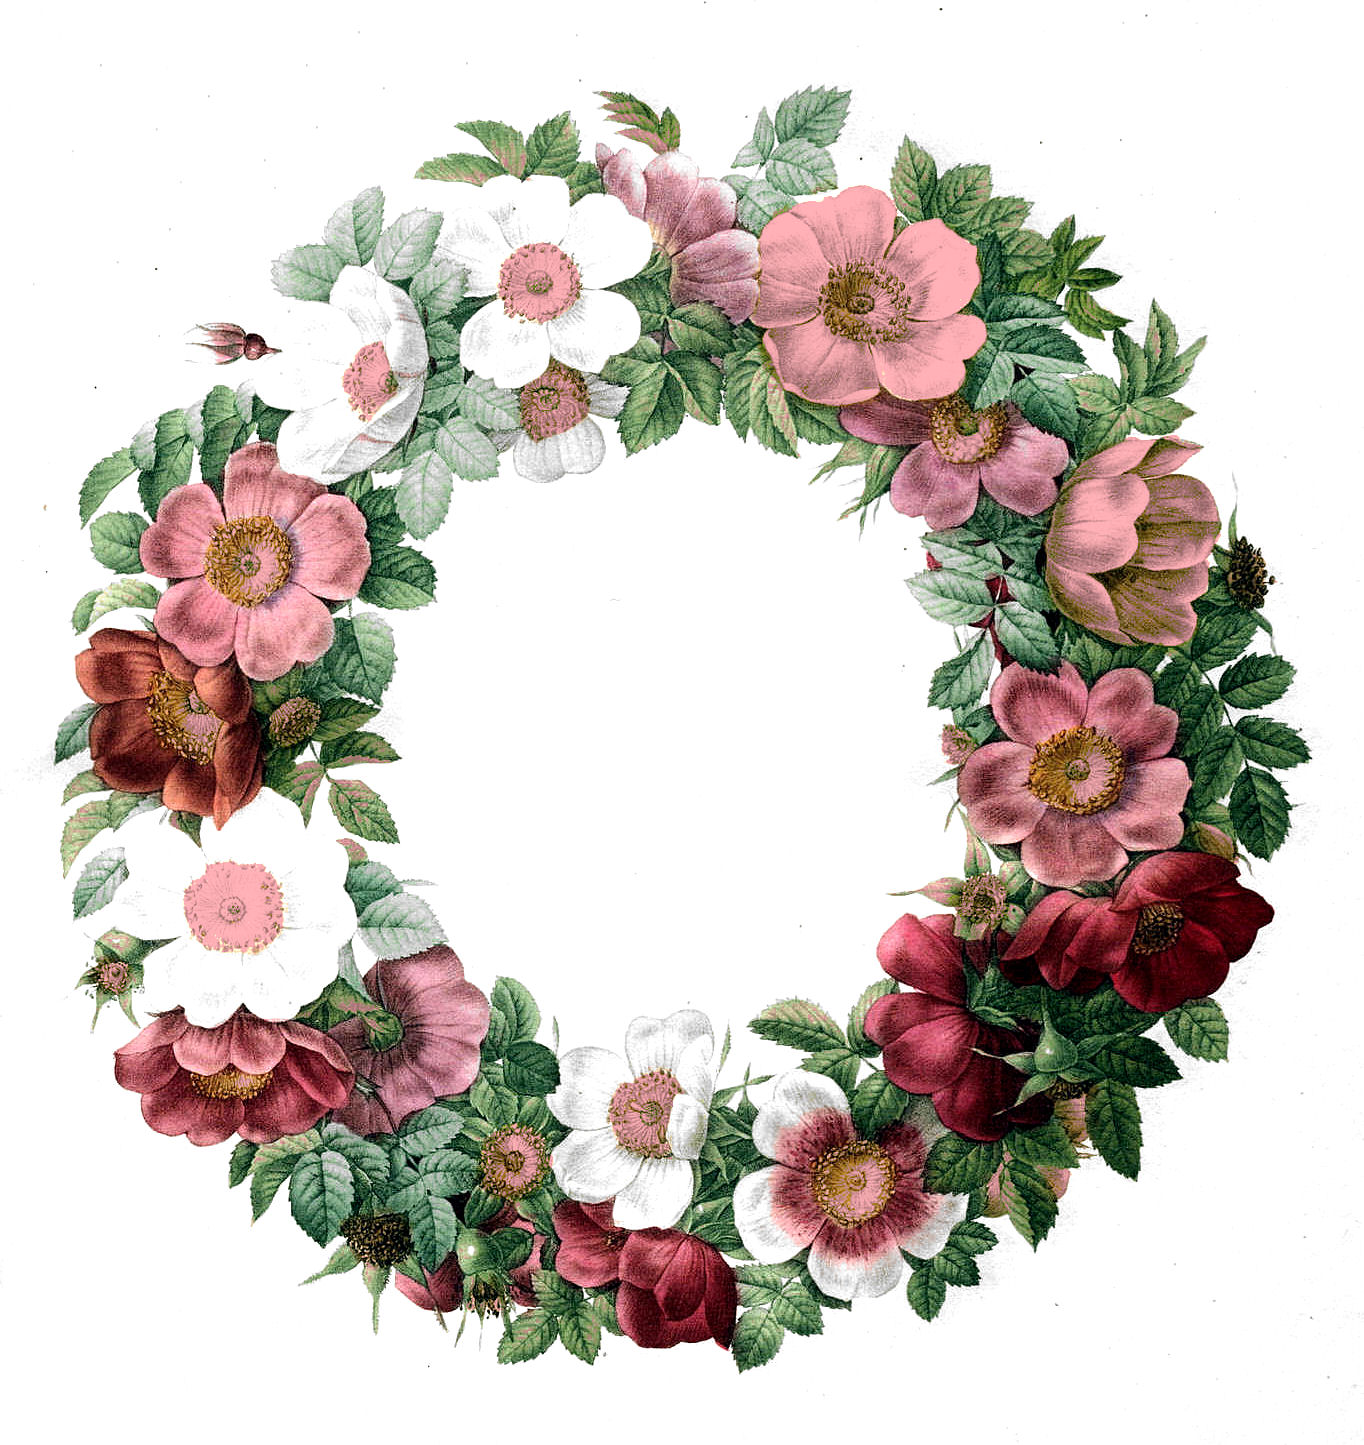 Free vintage clip art rose wreath the graphics fairy